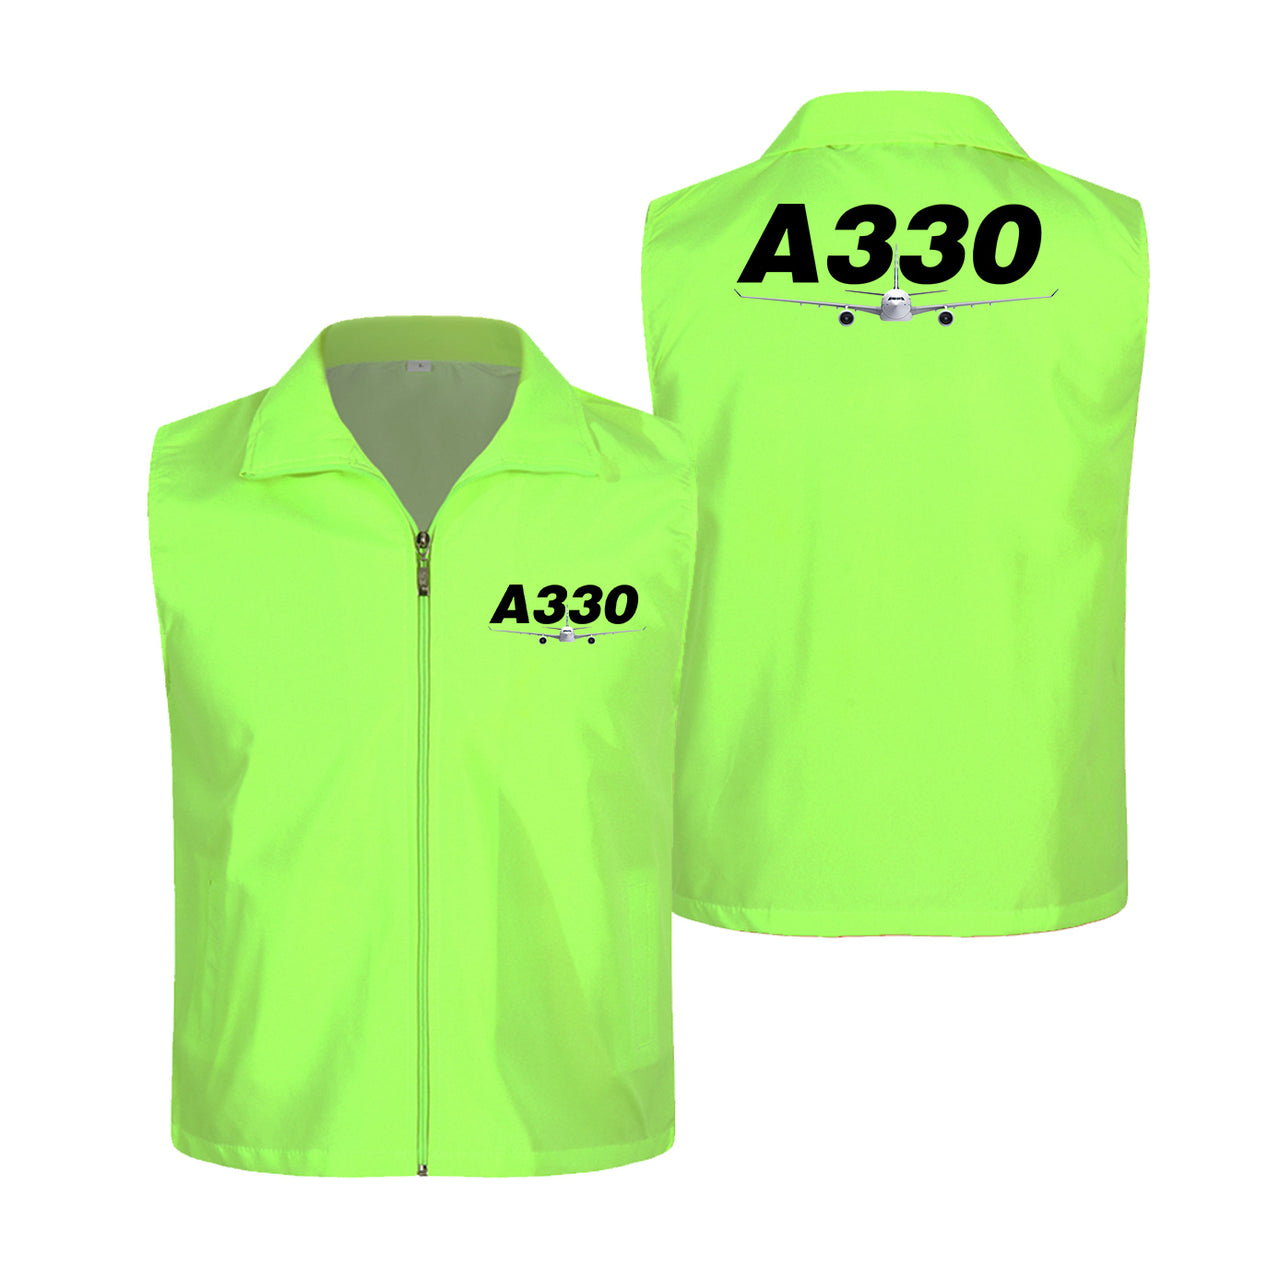 Super Airbus A330 Designed Thin Style Vests